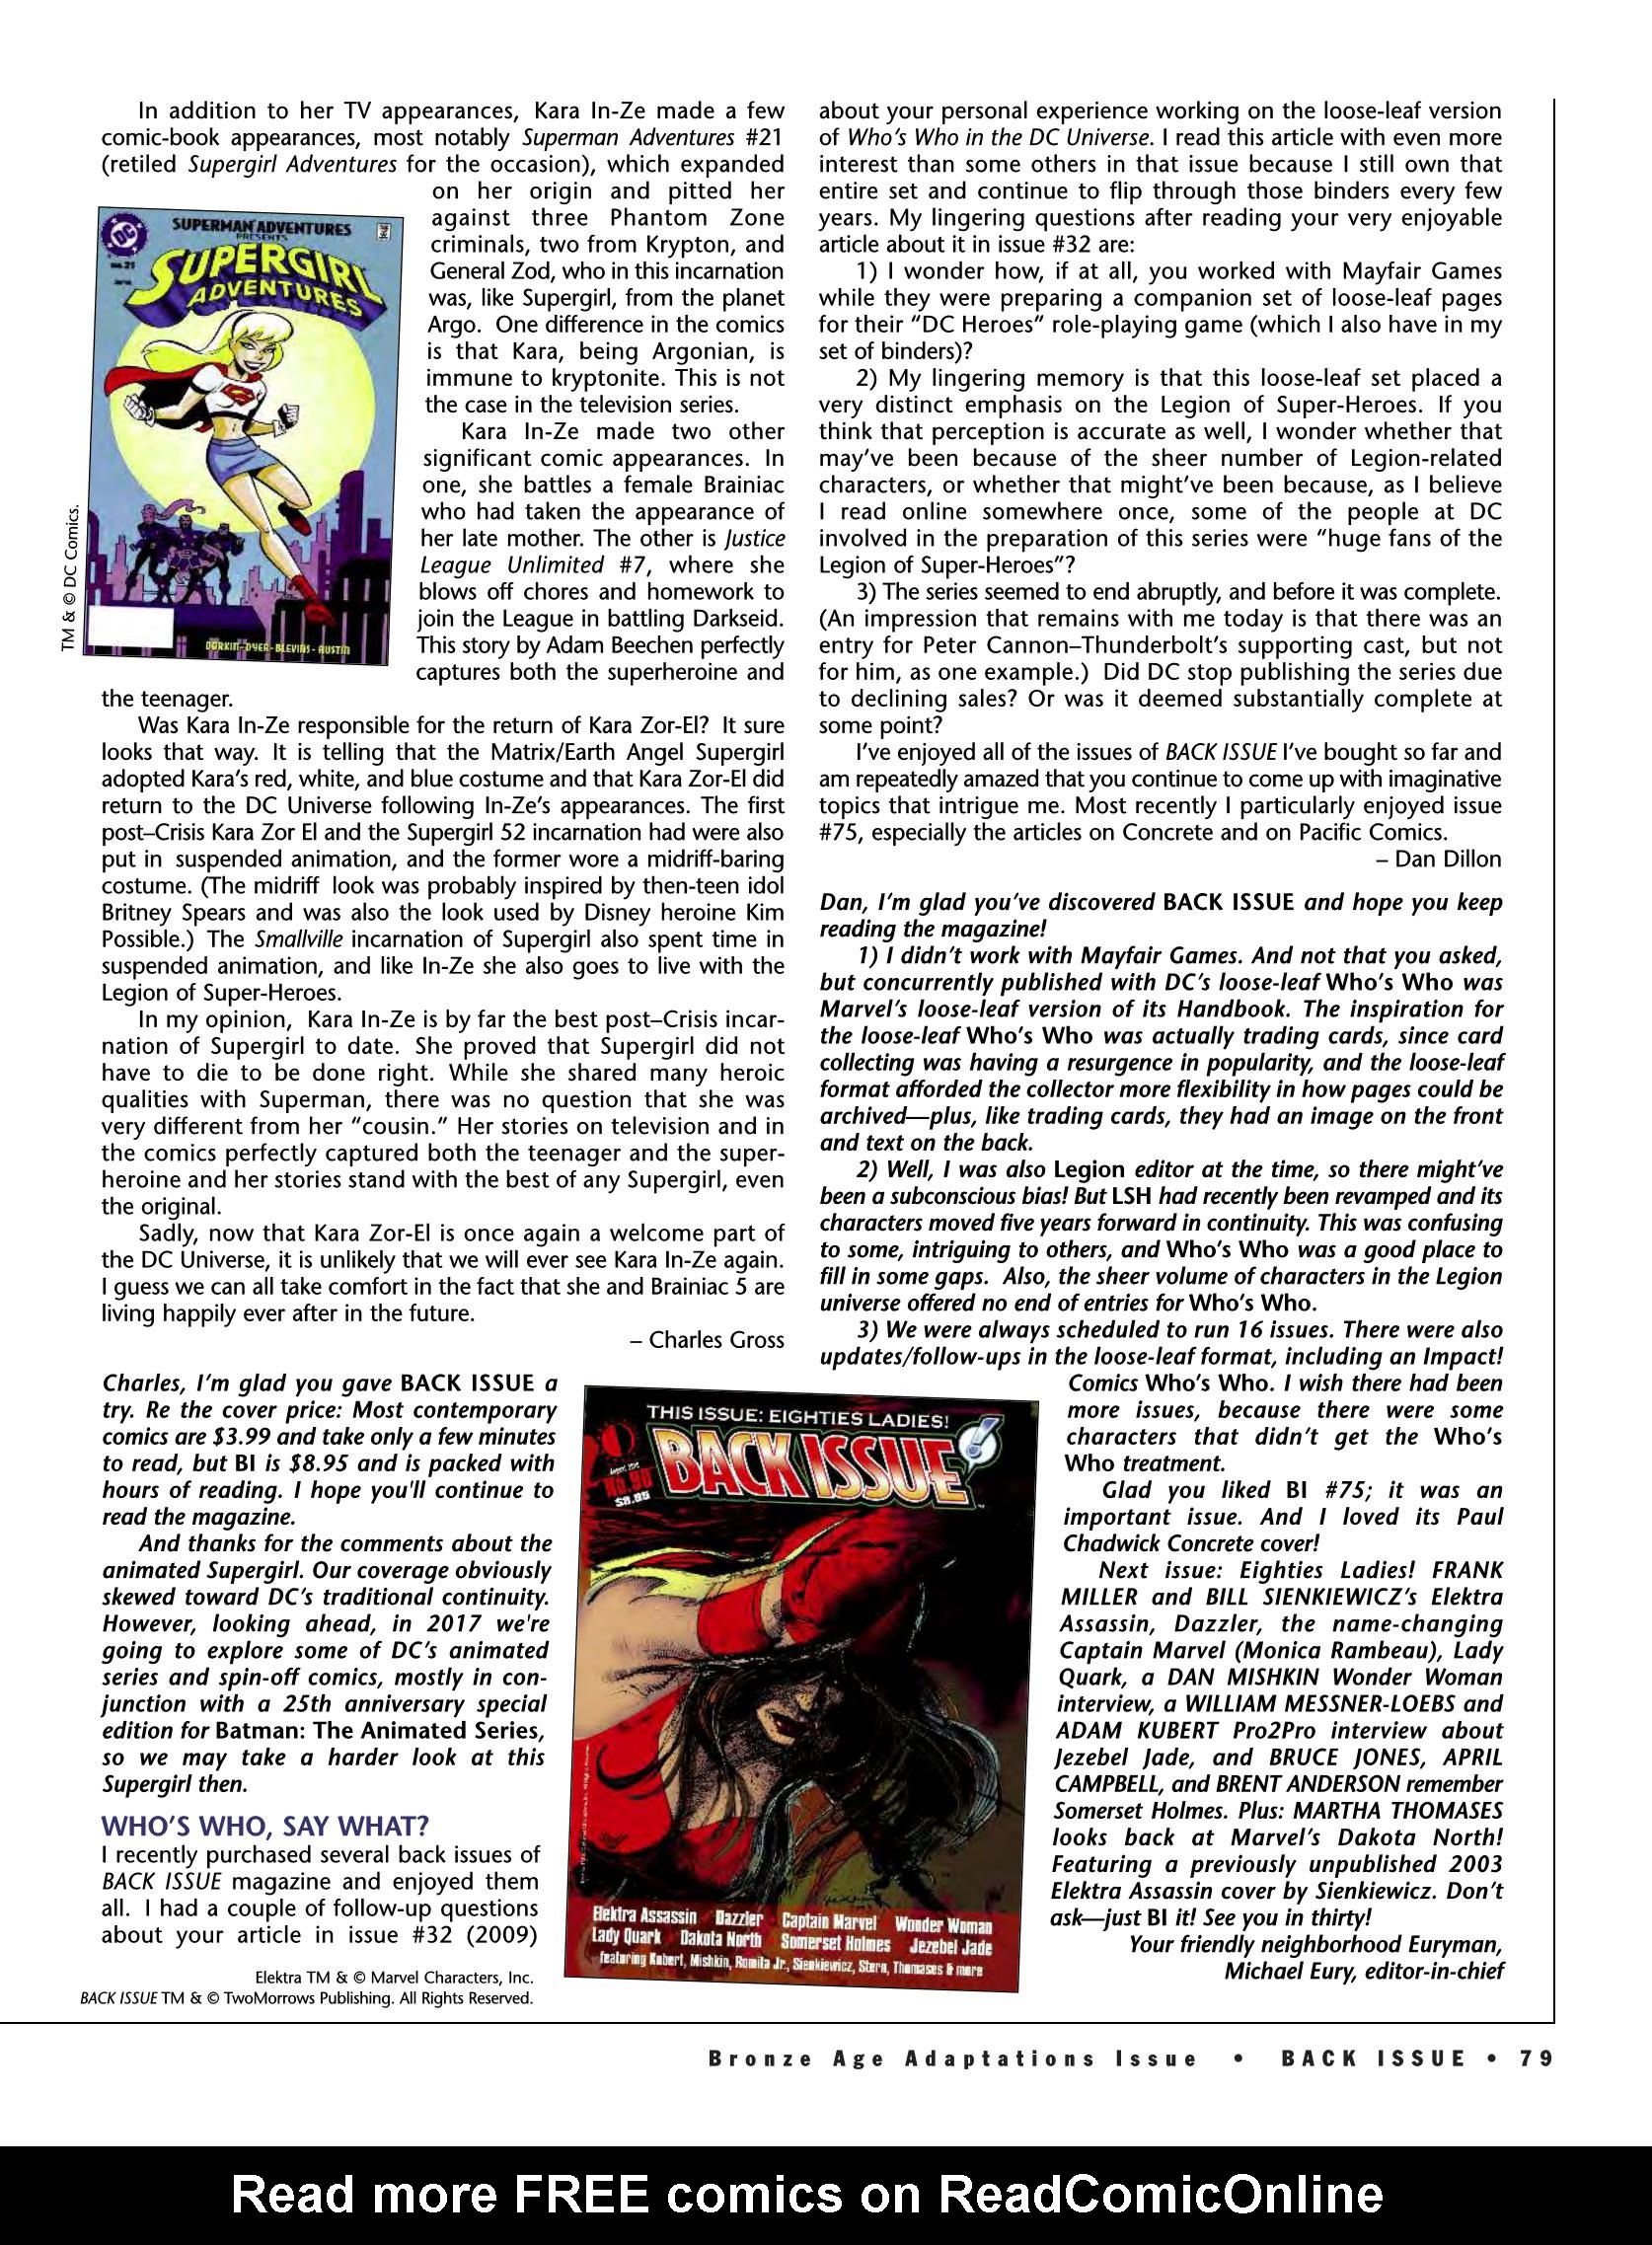 Read online Back Issue comic -  Issue #89 - 80